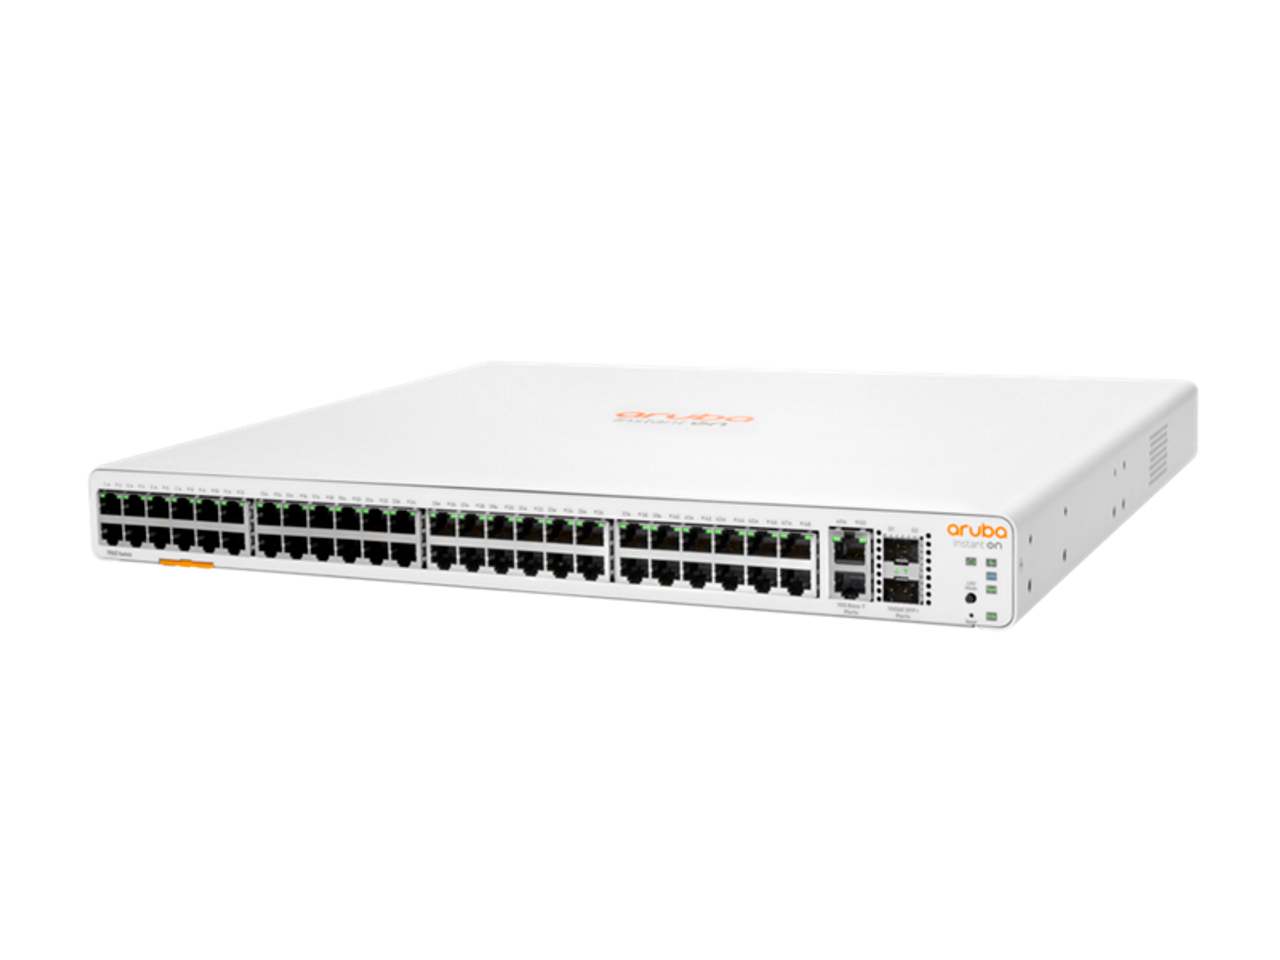 Aruba Instant On 1960 48-Port Gigabit Stackable Layer 2+ Smart Managed Switch With 2x10G & 2x10G SFP+